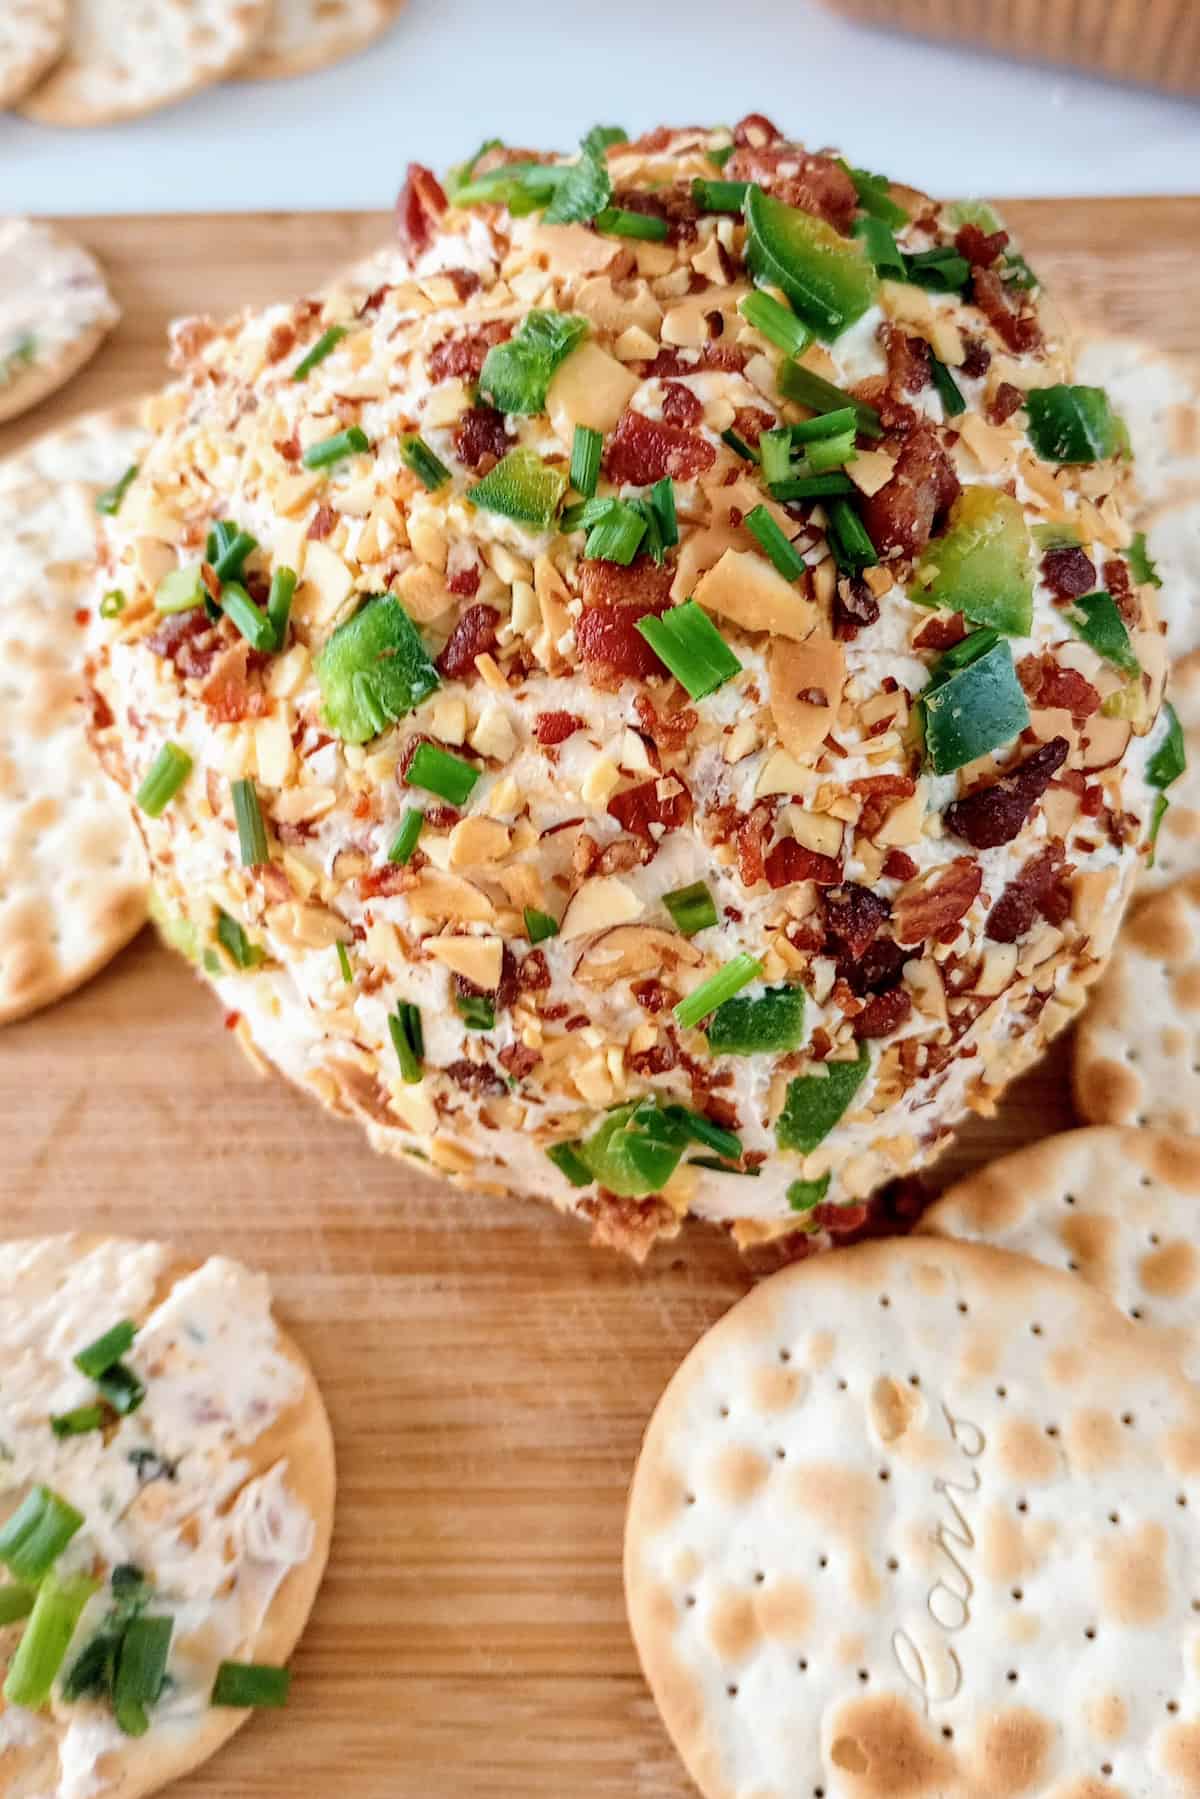 Jalapeno popper cheese ball next to crackers. Ready to eat.